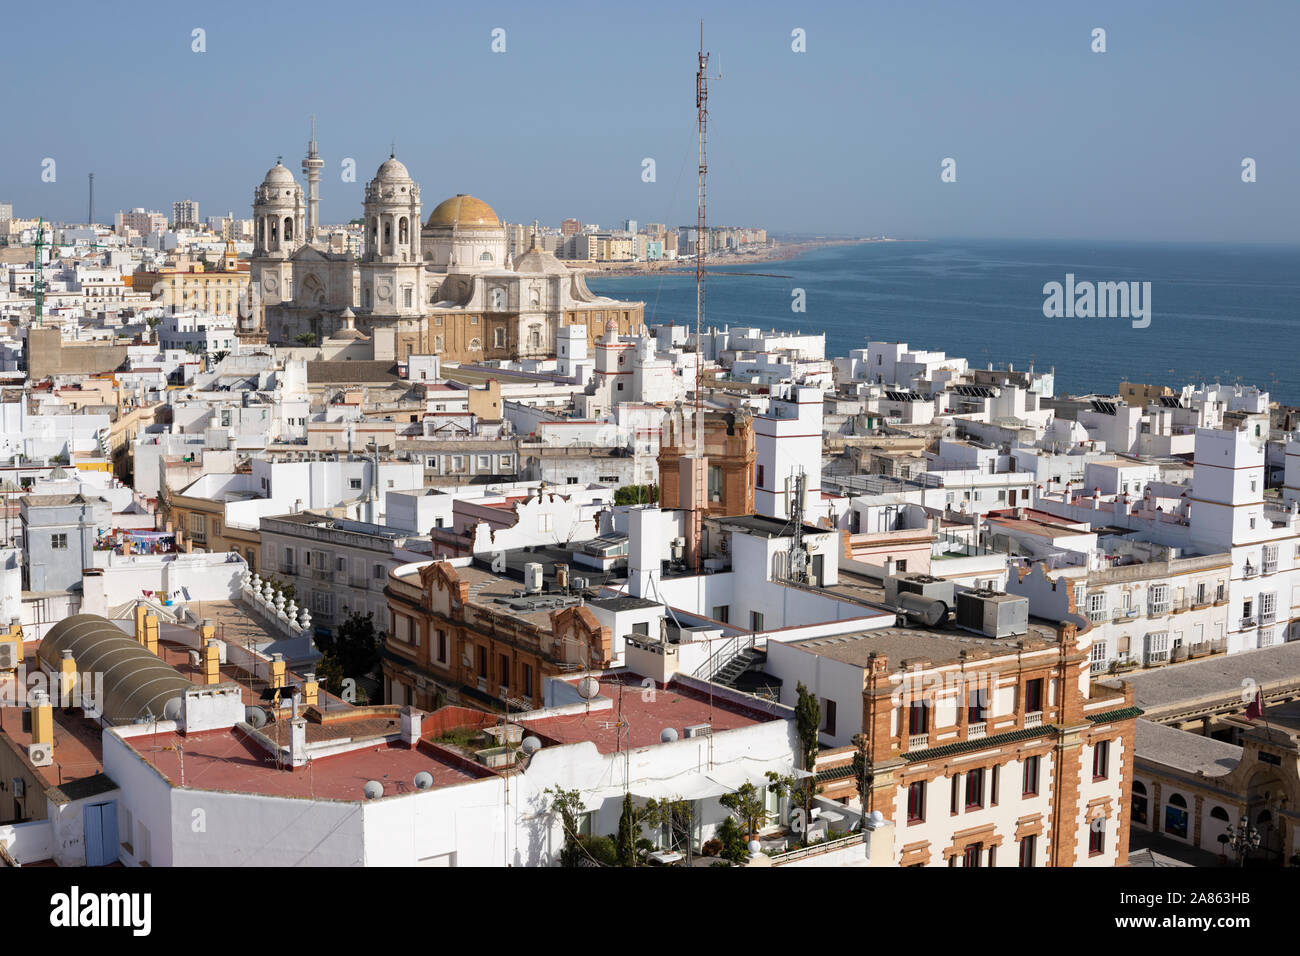 View of the cathedral and city from the top of the Torre Tavira camera obscura tower, Cadiz, Andalucia, Spain, Europe Stock Photo